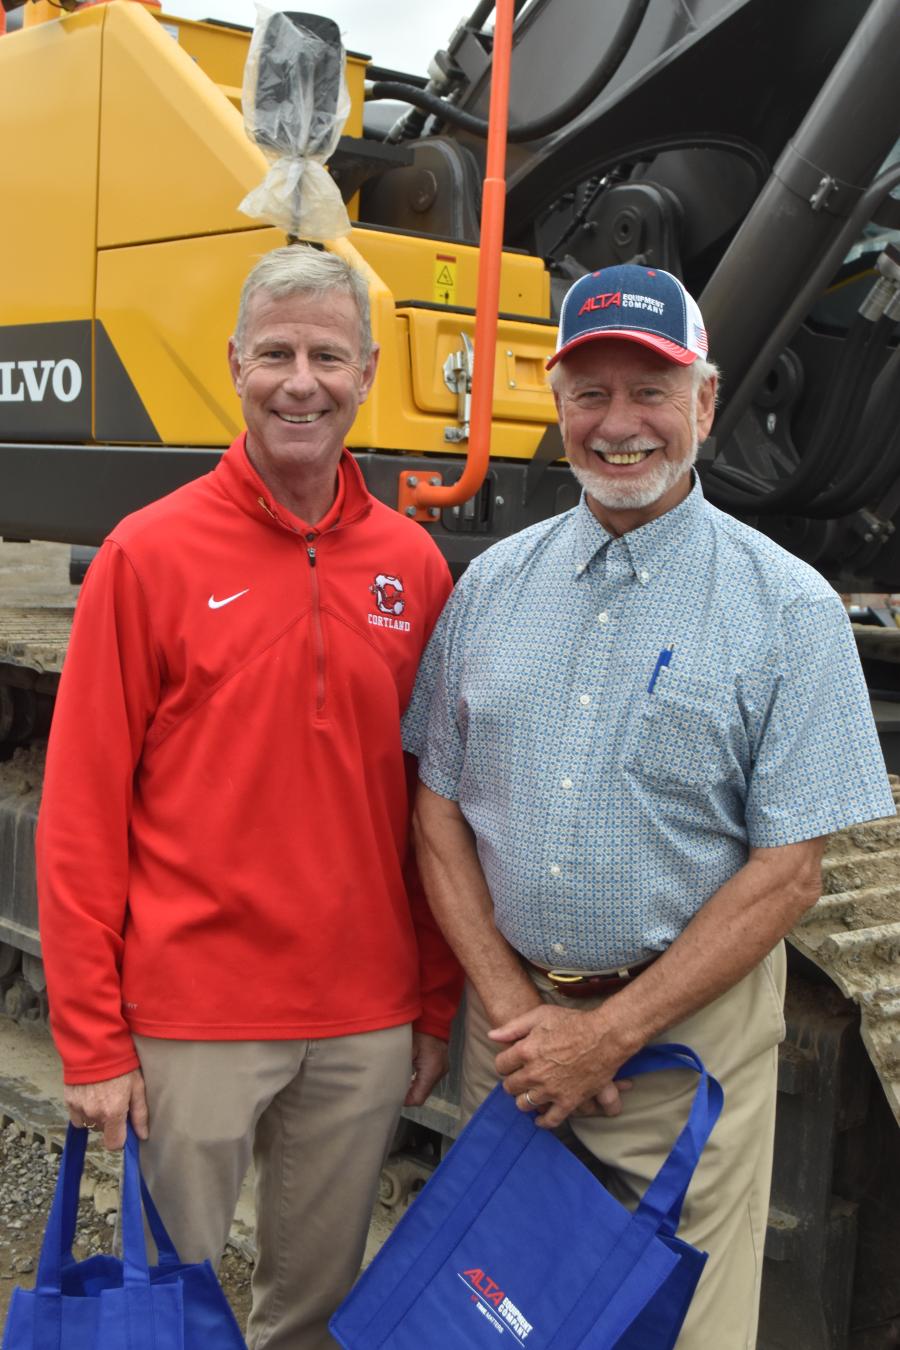 Tim Delaney (L) and Harry Wells do some serious shopping to see if there is anything that should be added to American Equipment’s rental fleet.
(CEG photo)